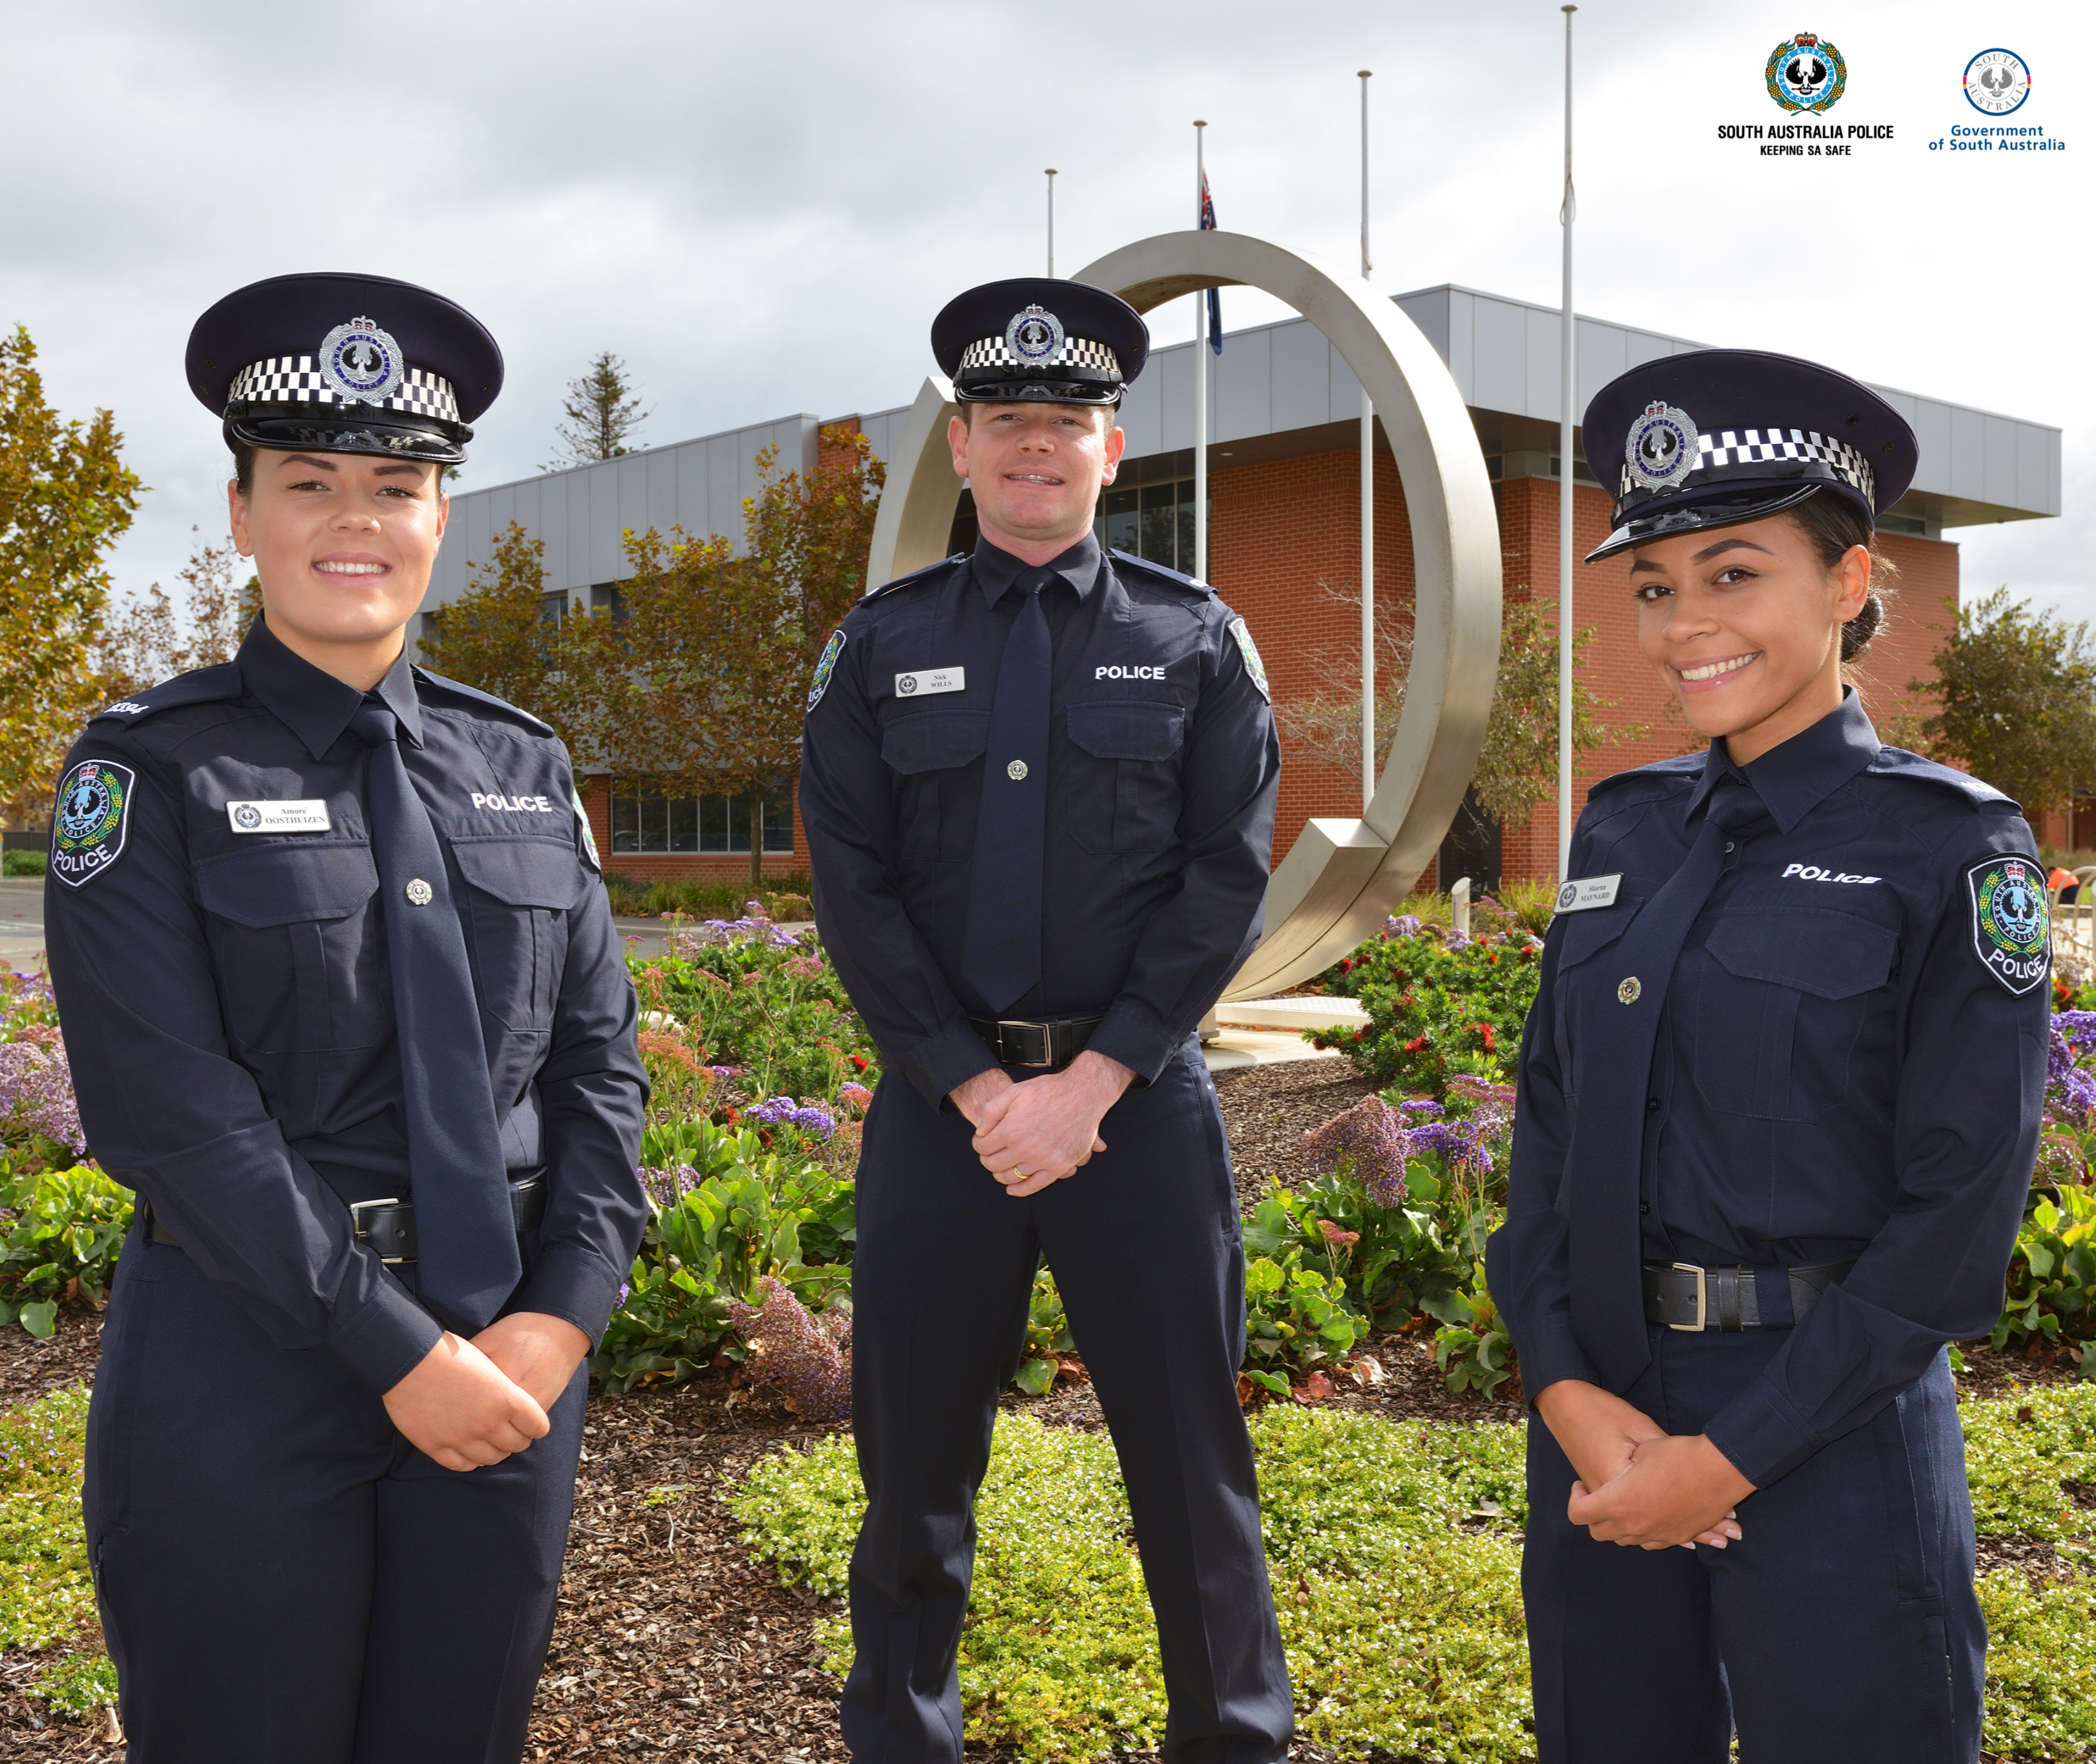 Left to Right: Probationary Constable Amore Oosthuizen, Probationary Constable Nicholas Wills and Probationary Constable Sharna Maynard.